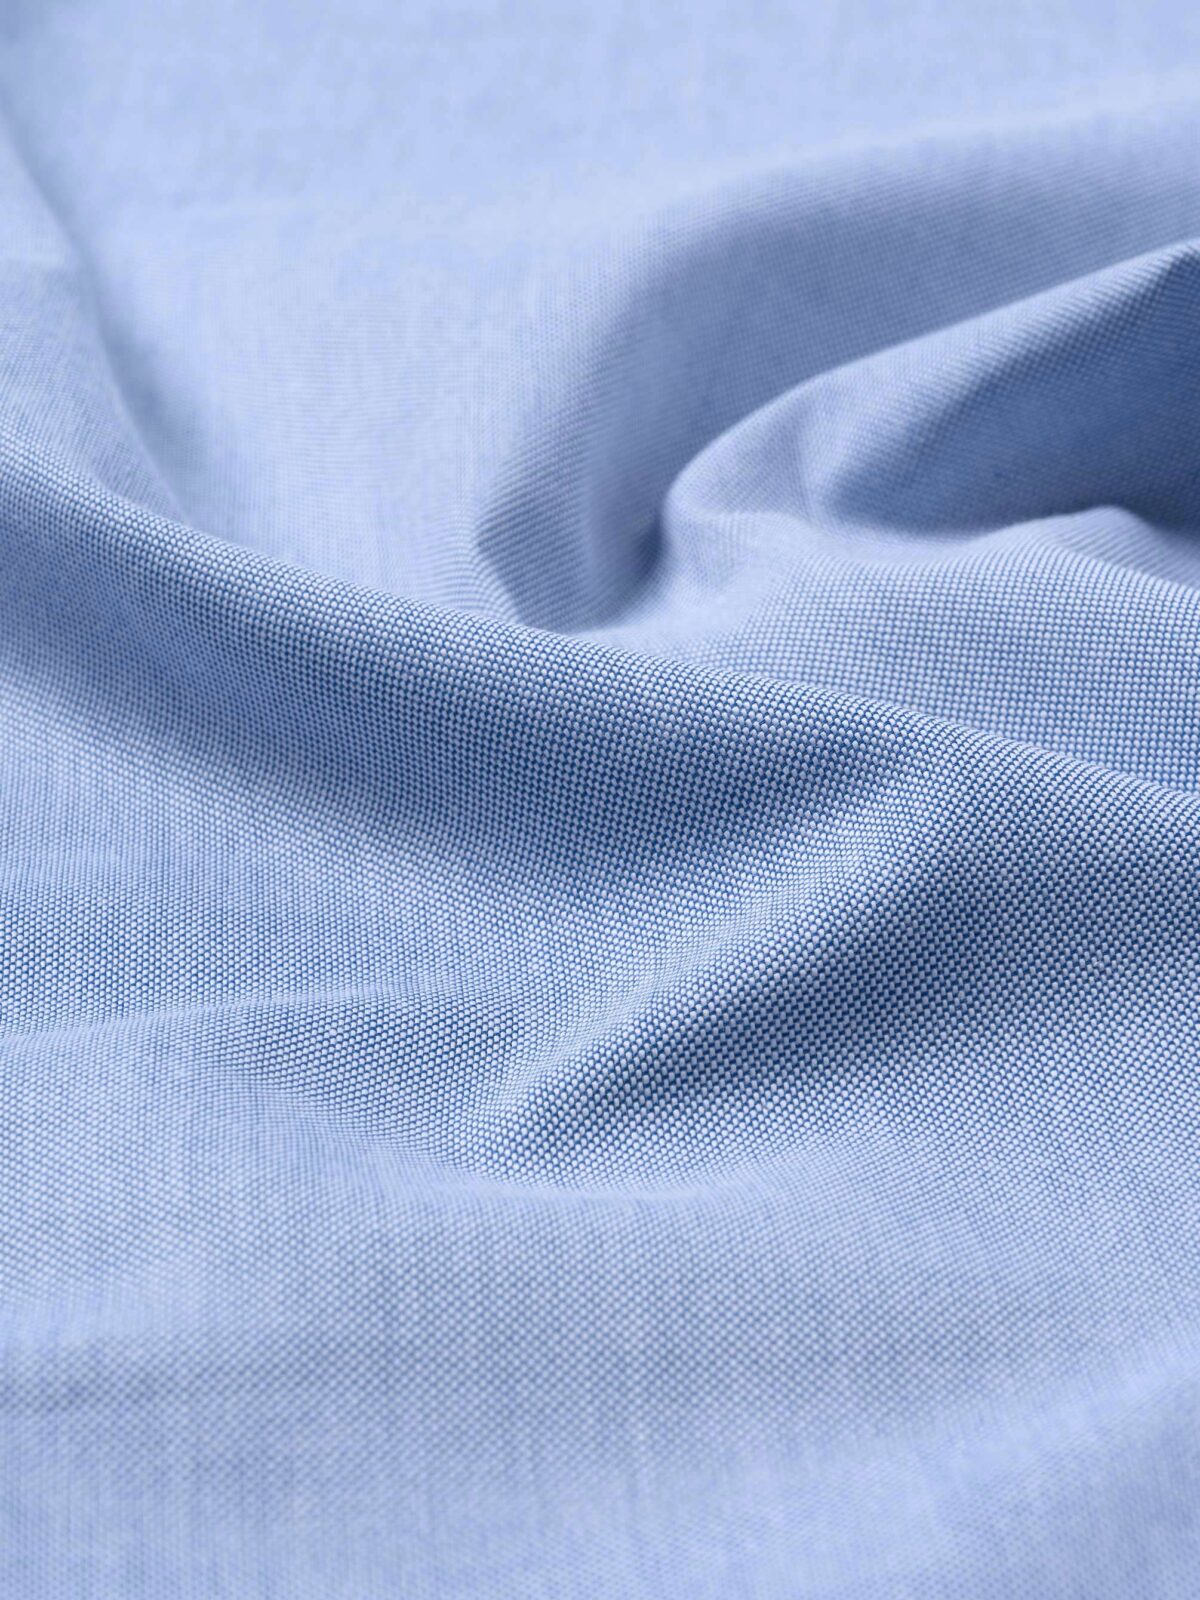 Washed Blue Lightweight Oxford Shirts by Proper Cloth